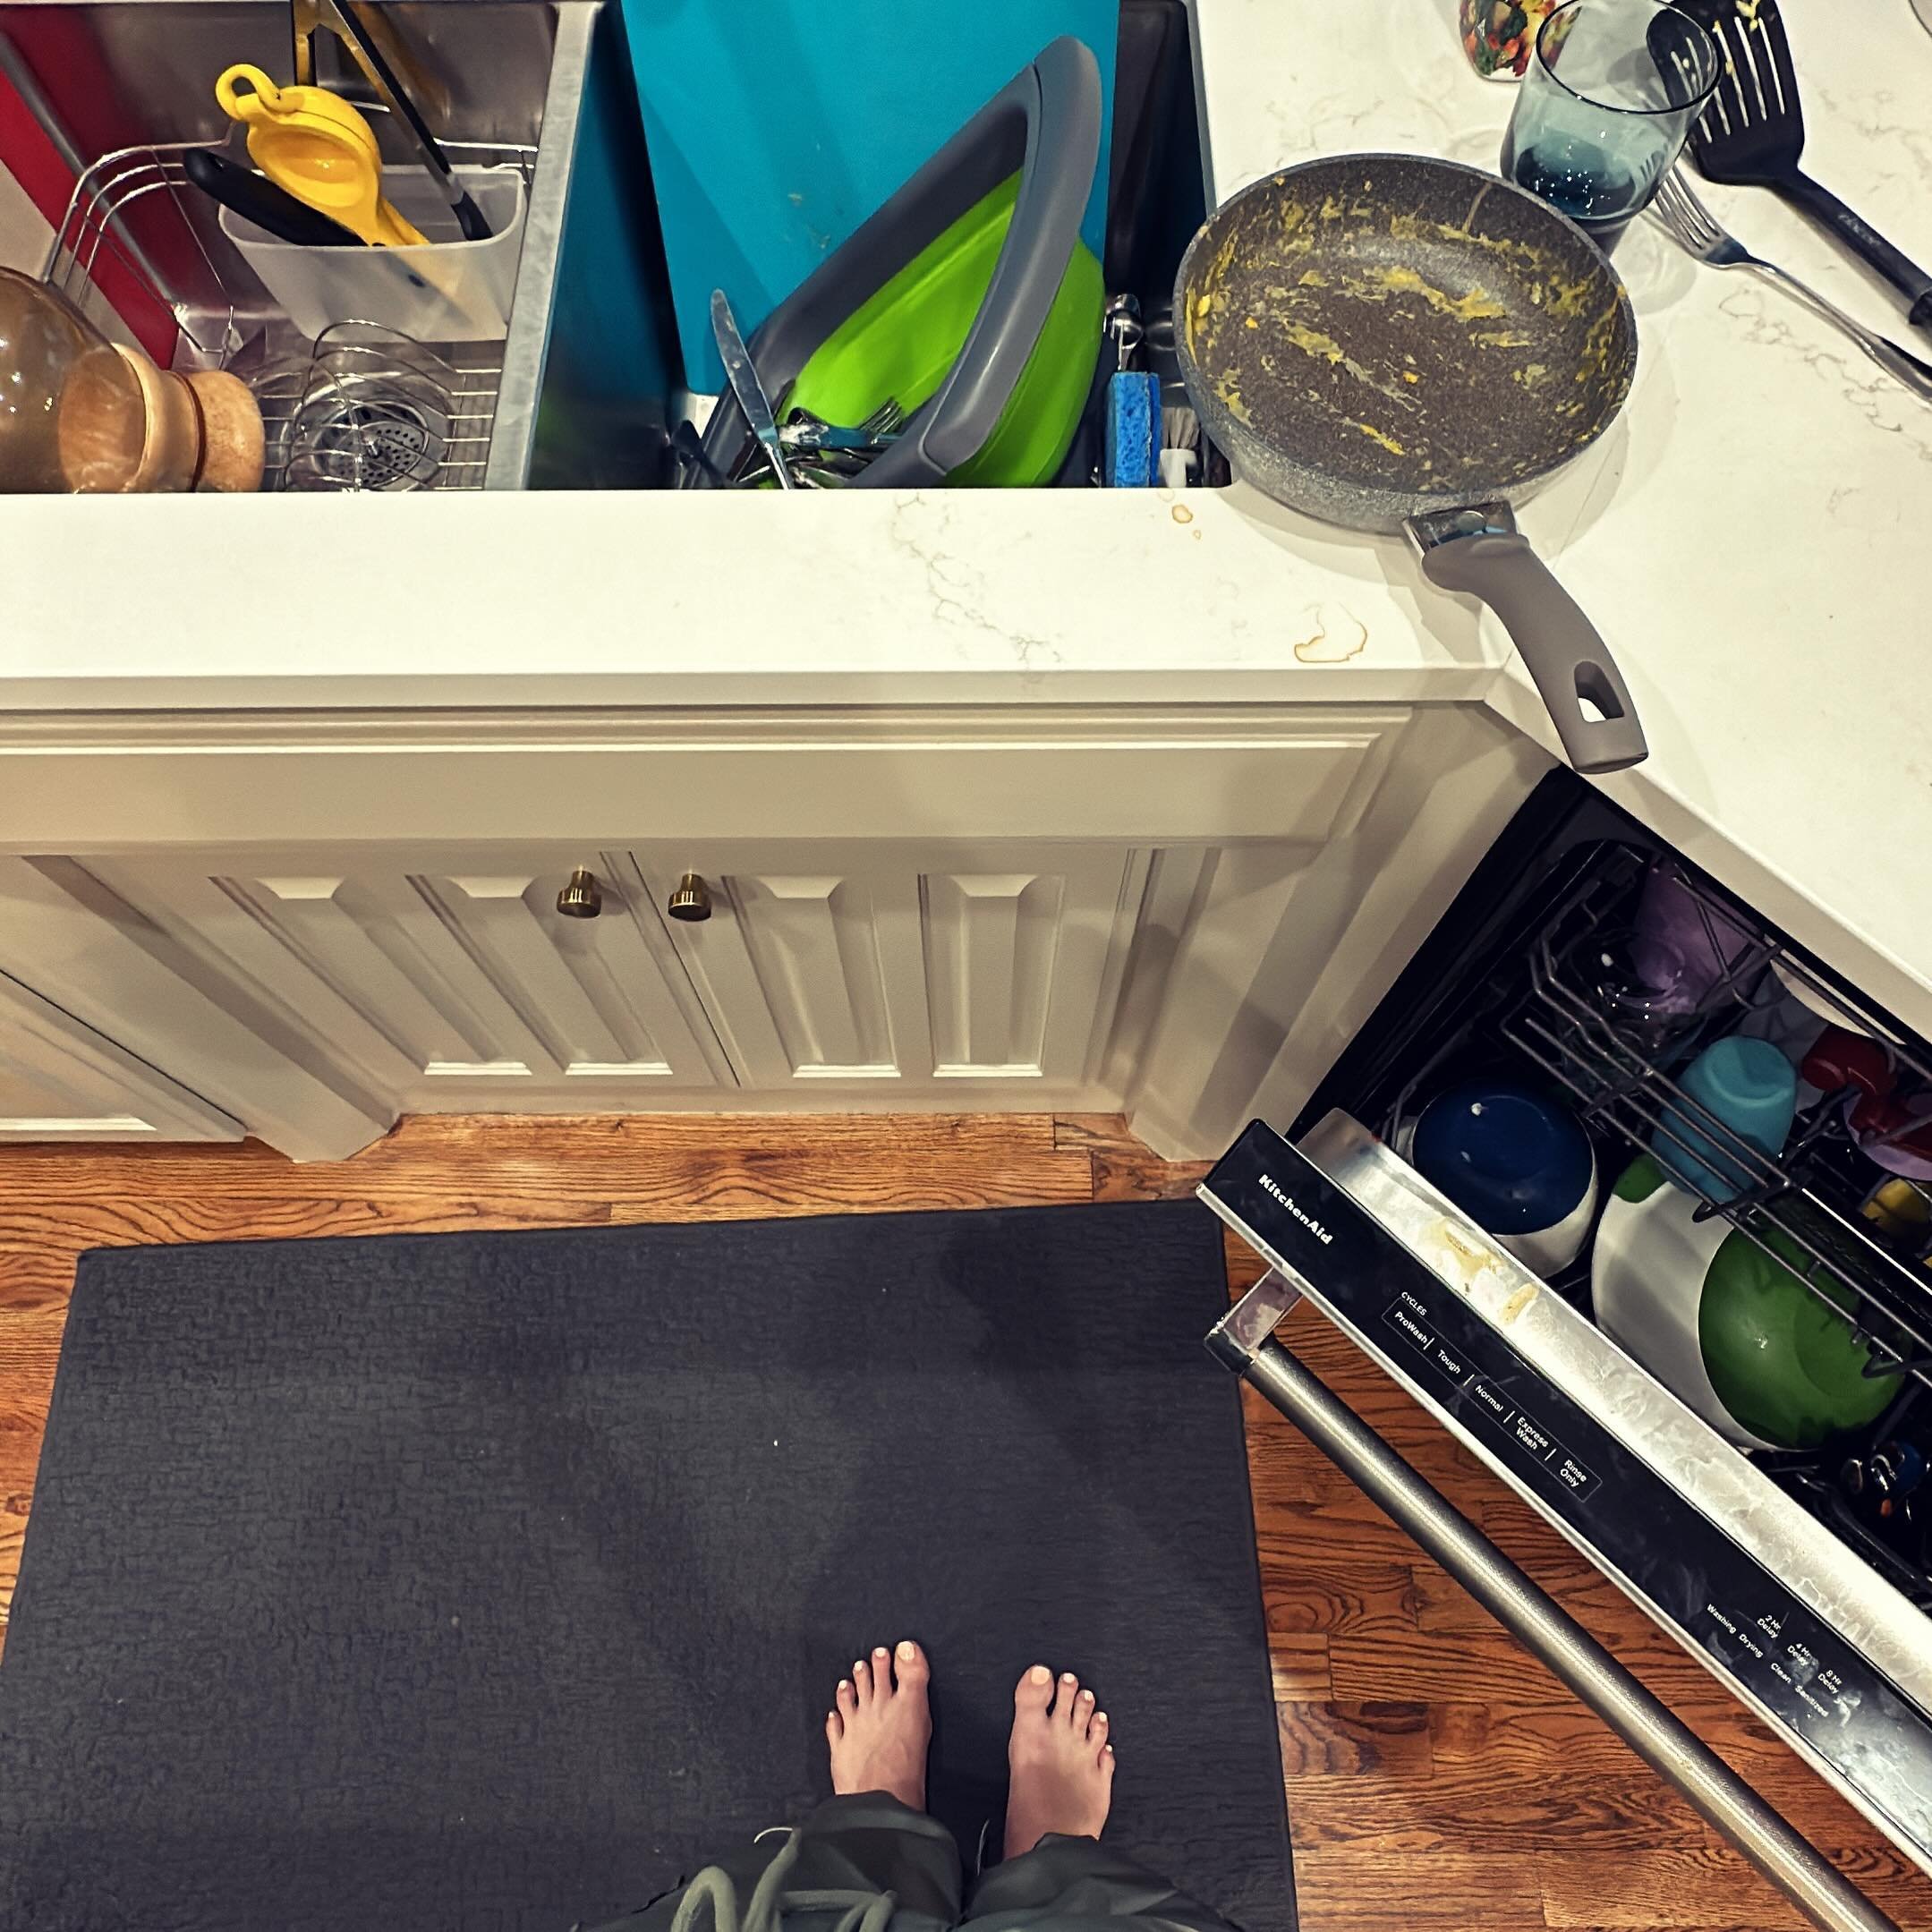 The kitchen sink.
I spend more time in this spot than anywhere else! Anyone else? 🙋🏼&zwj;♀️

It&rsquo;s here I remind myself that dirty dishes mean we have food to eat.

And that lots of dirty dishes mean we have lots of people eating.

And the fac